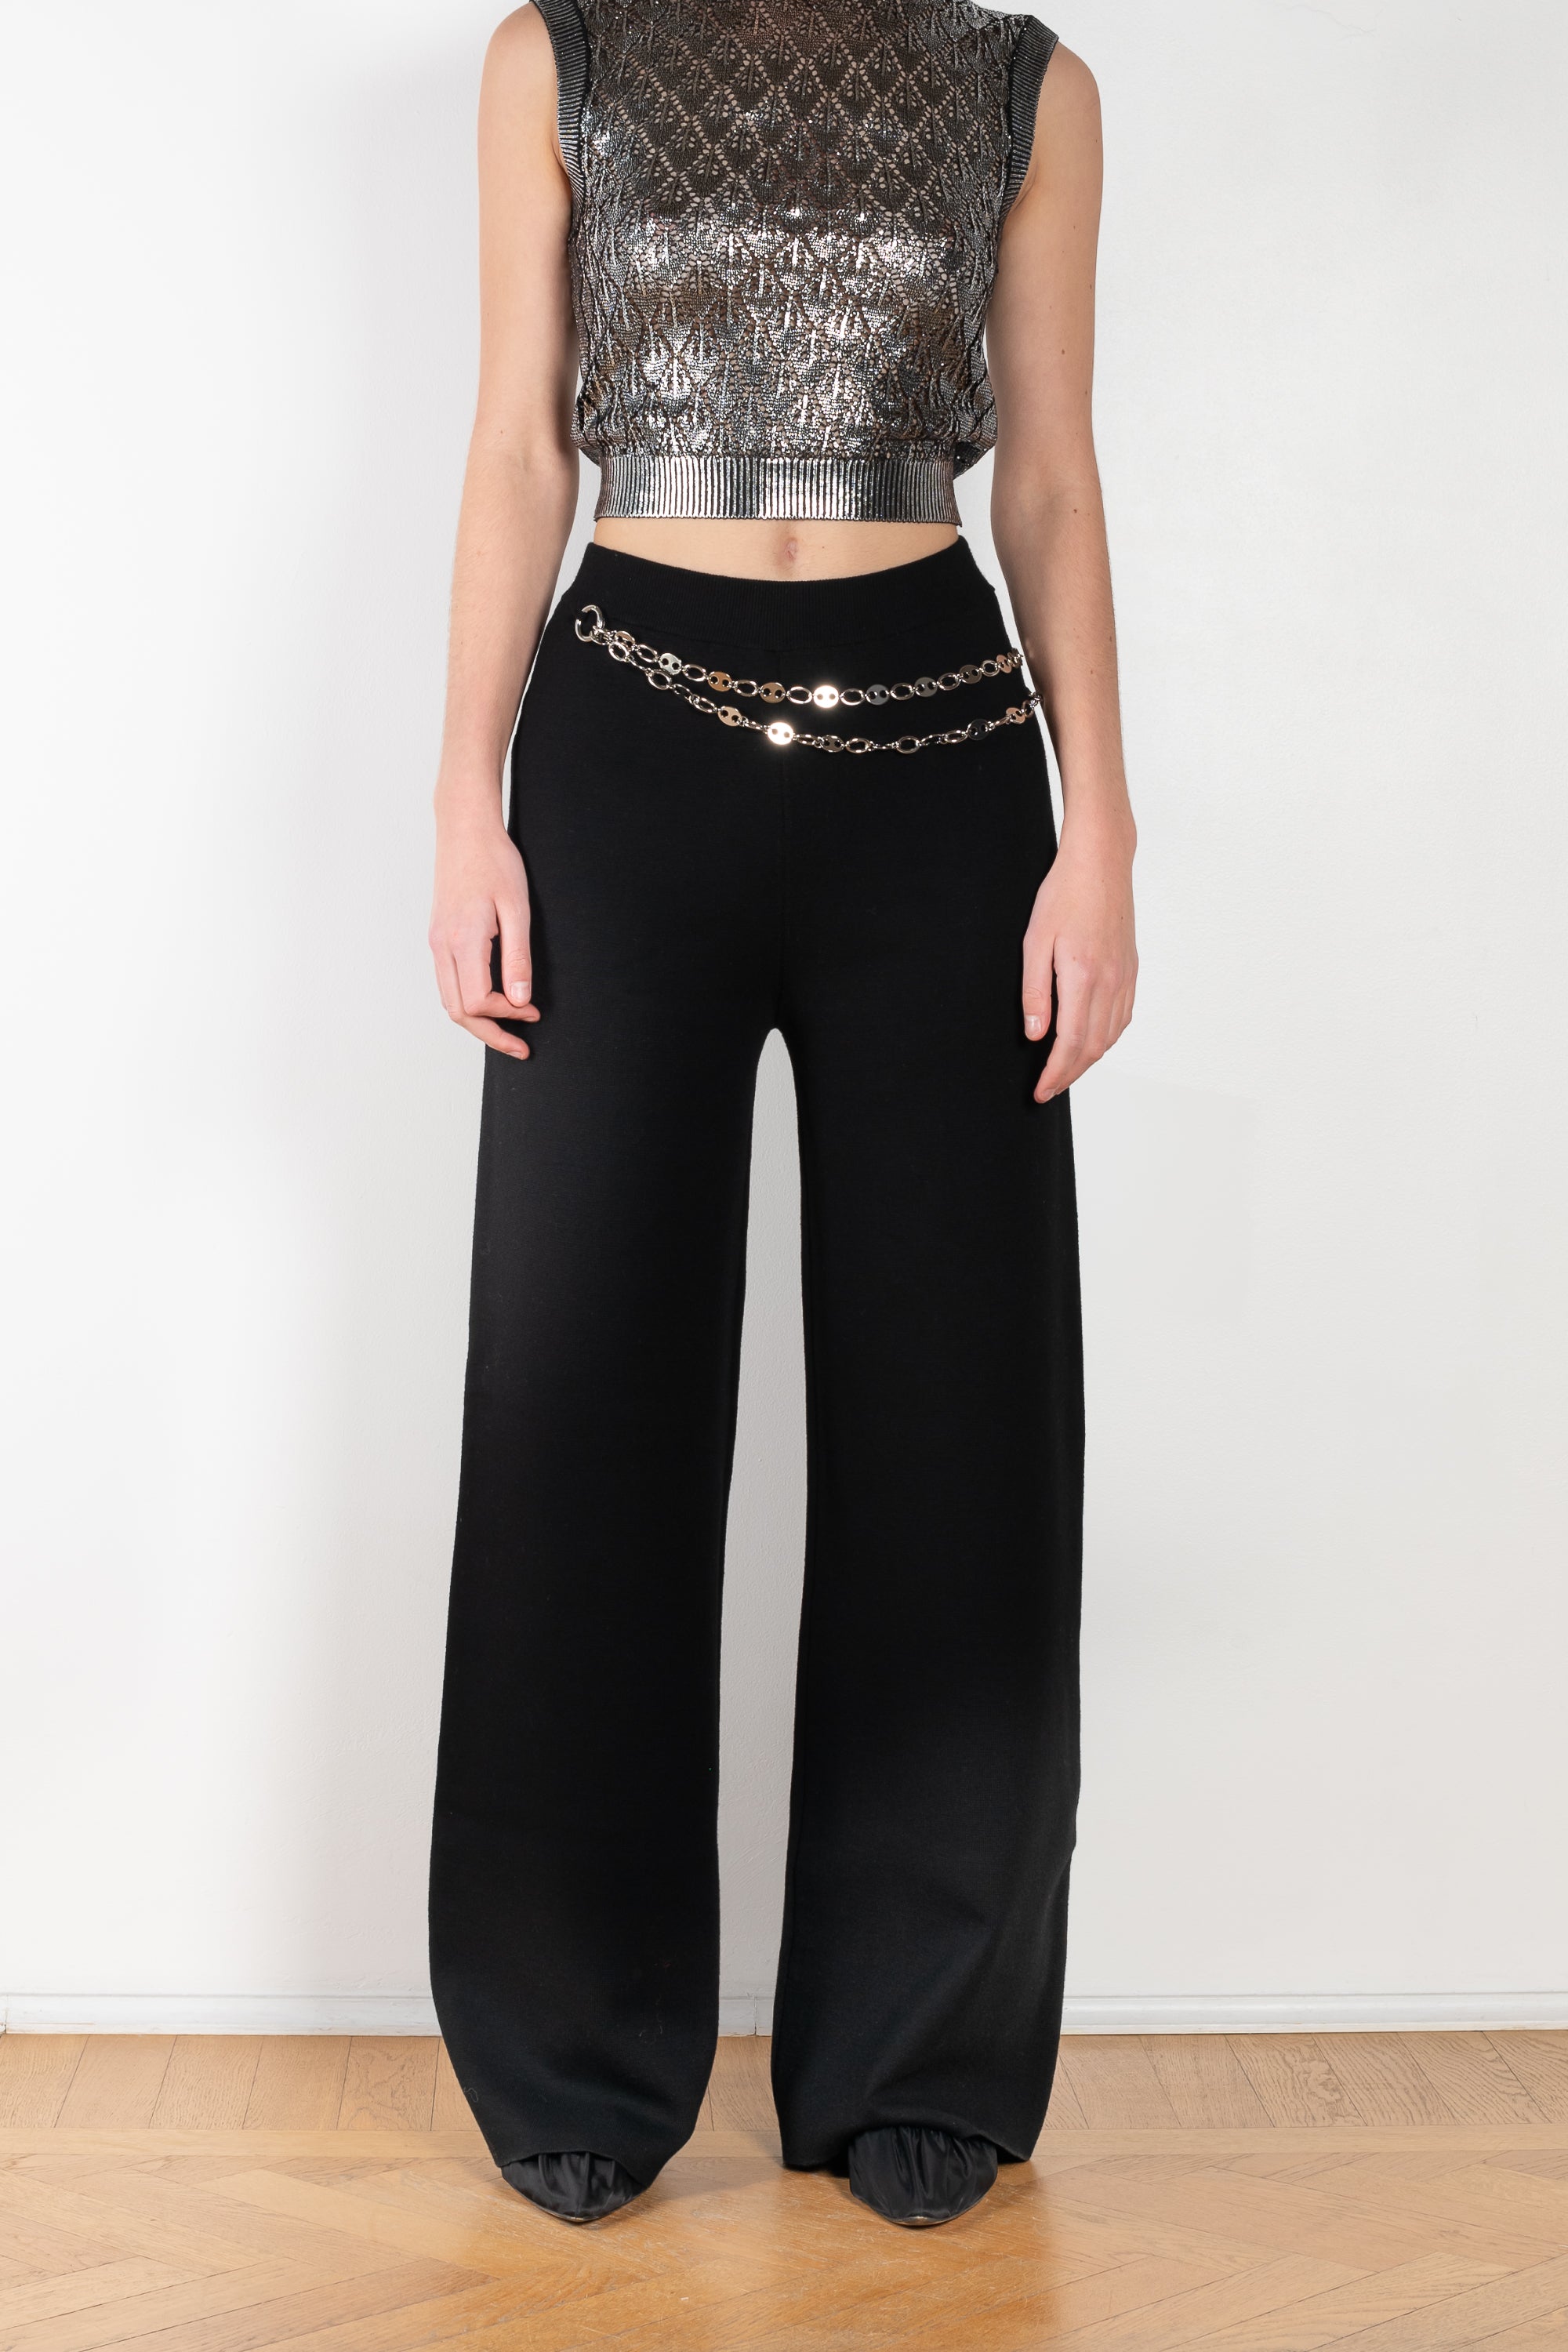 PACO RABANNE Knit Chain Pants I ICON